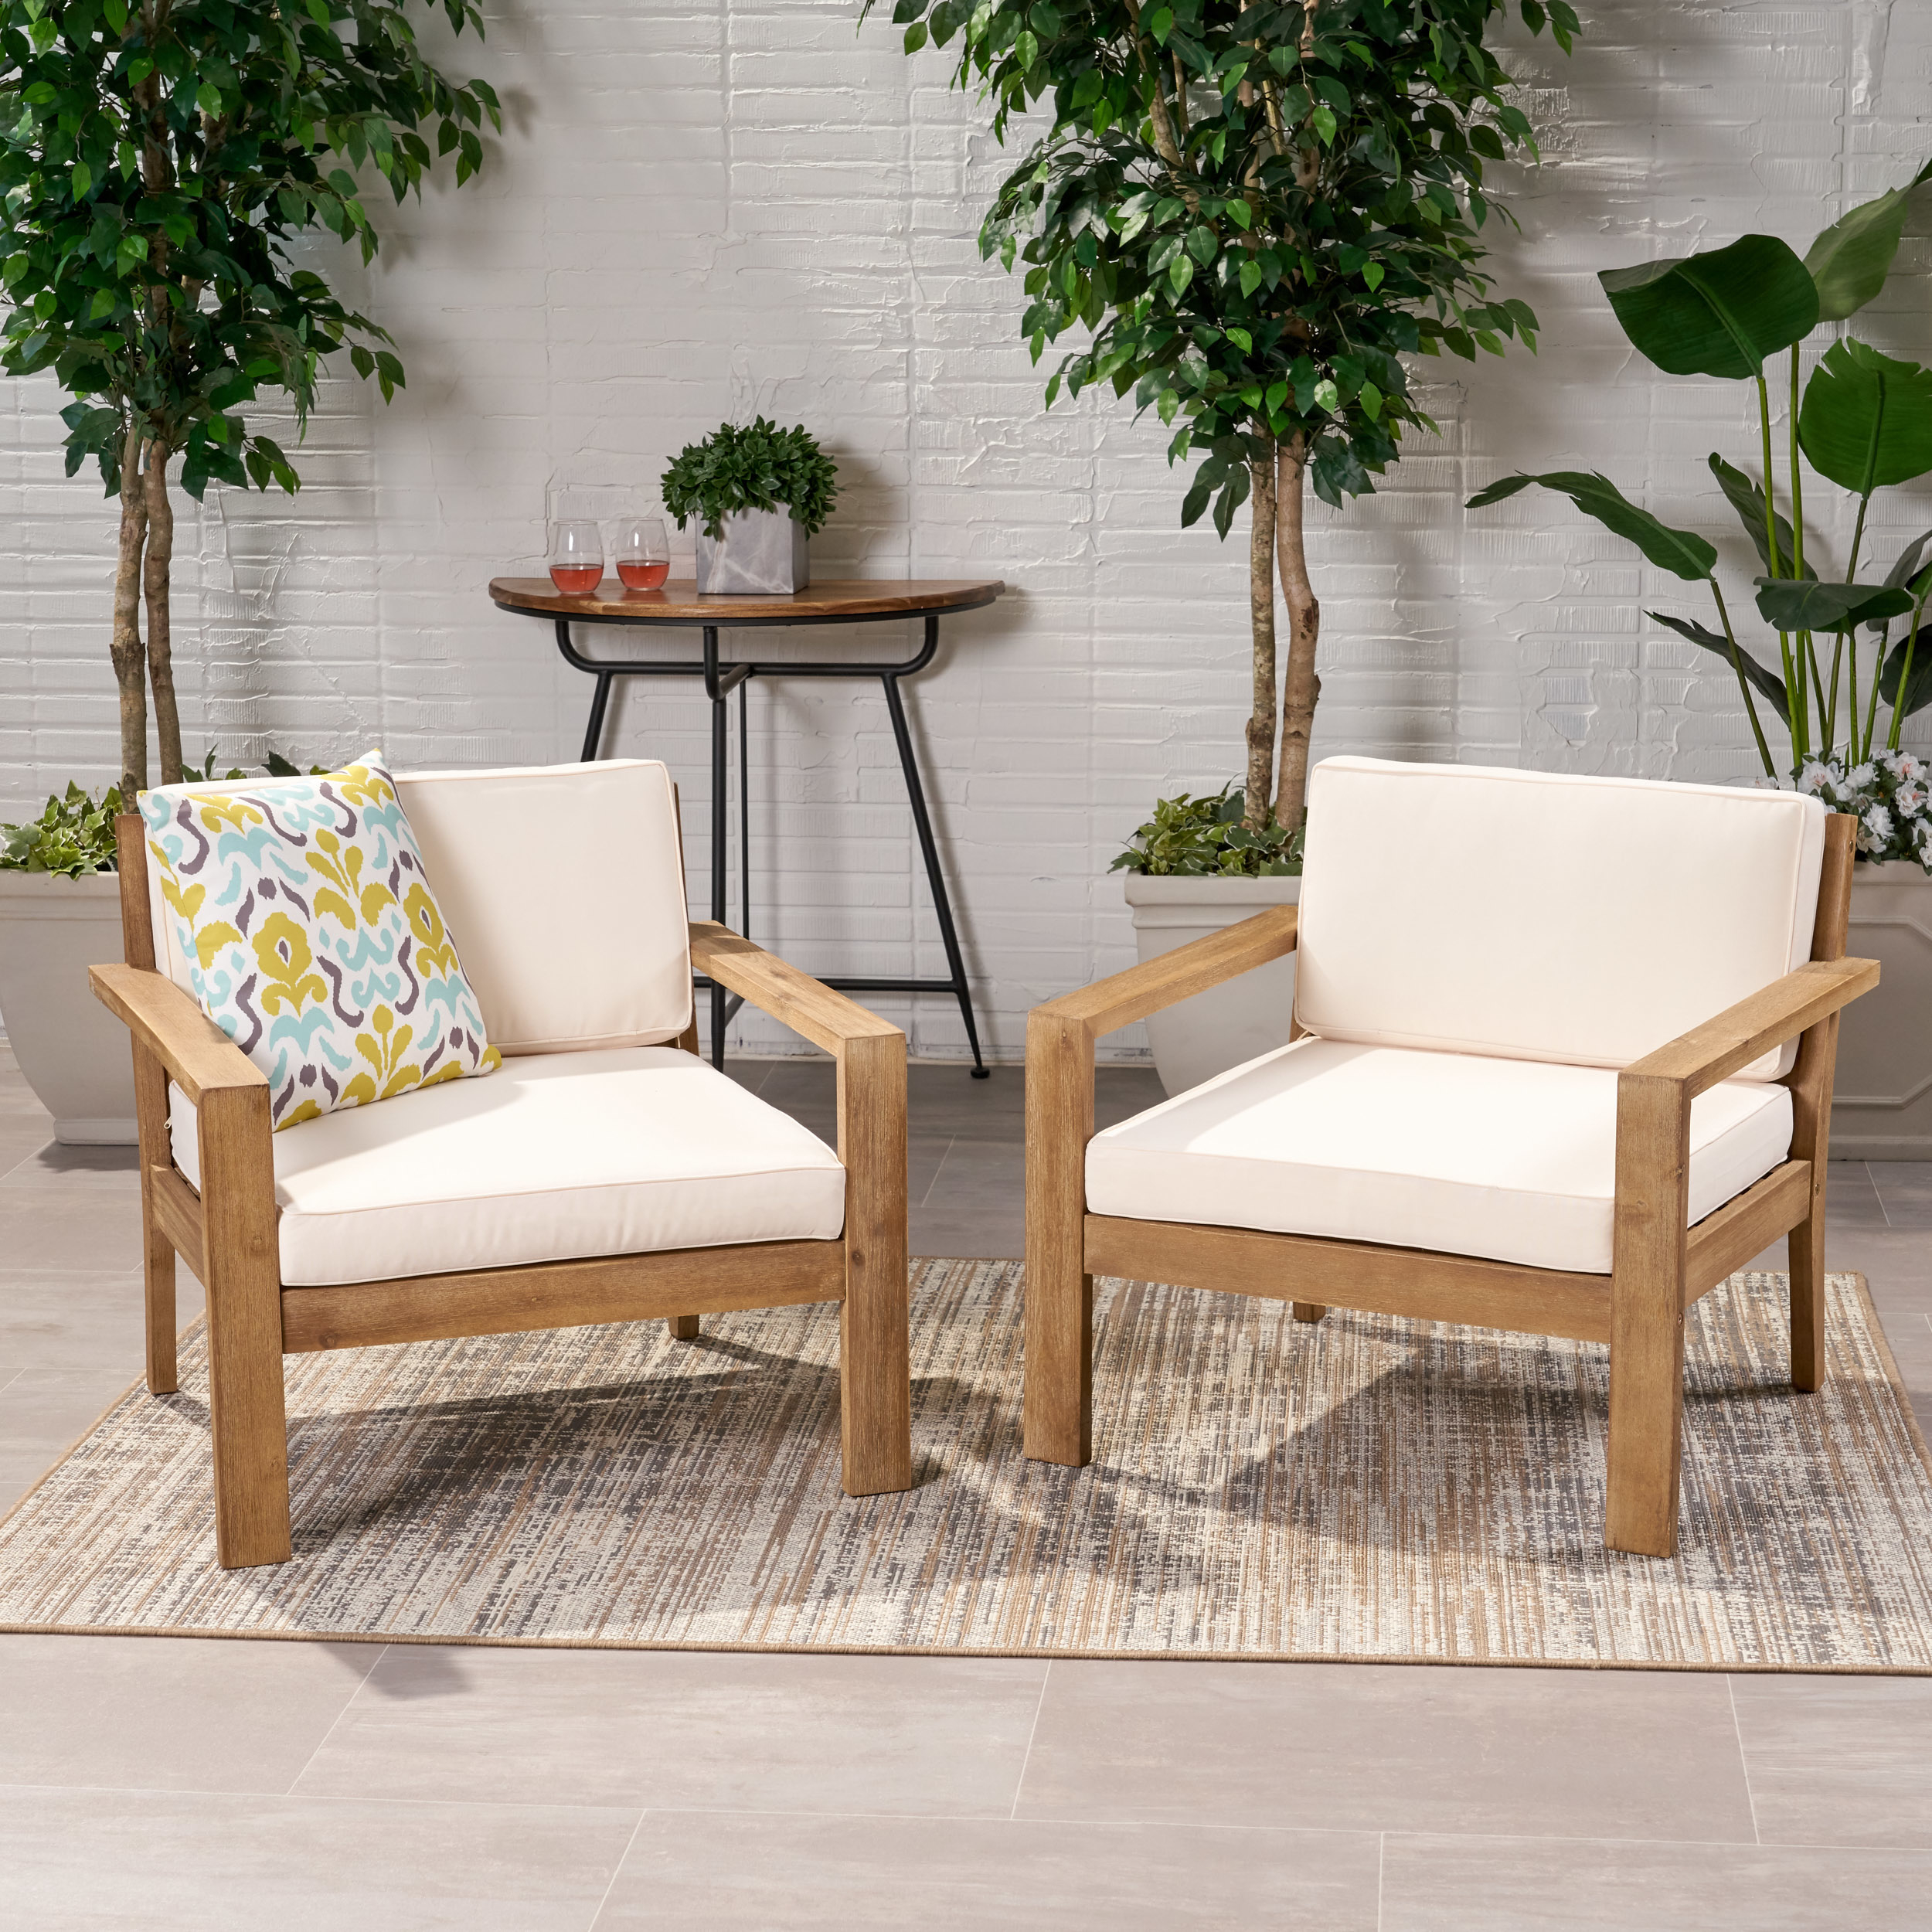 Miranda Outdoor Acacia Wood Club Chairs With Cushions (Set Of 2) - Brushed Light Brown Finish, Cream